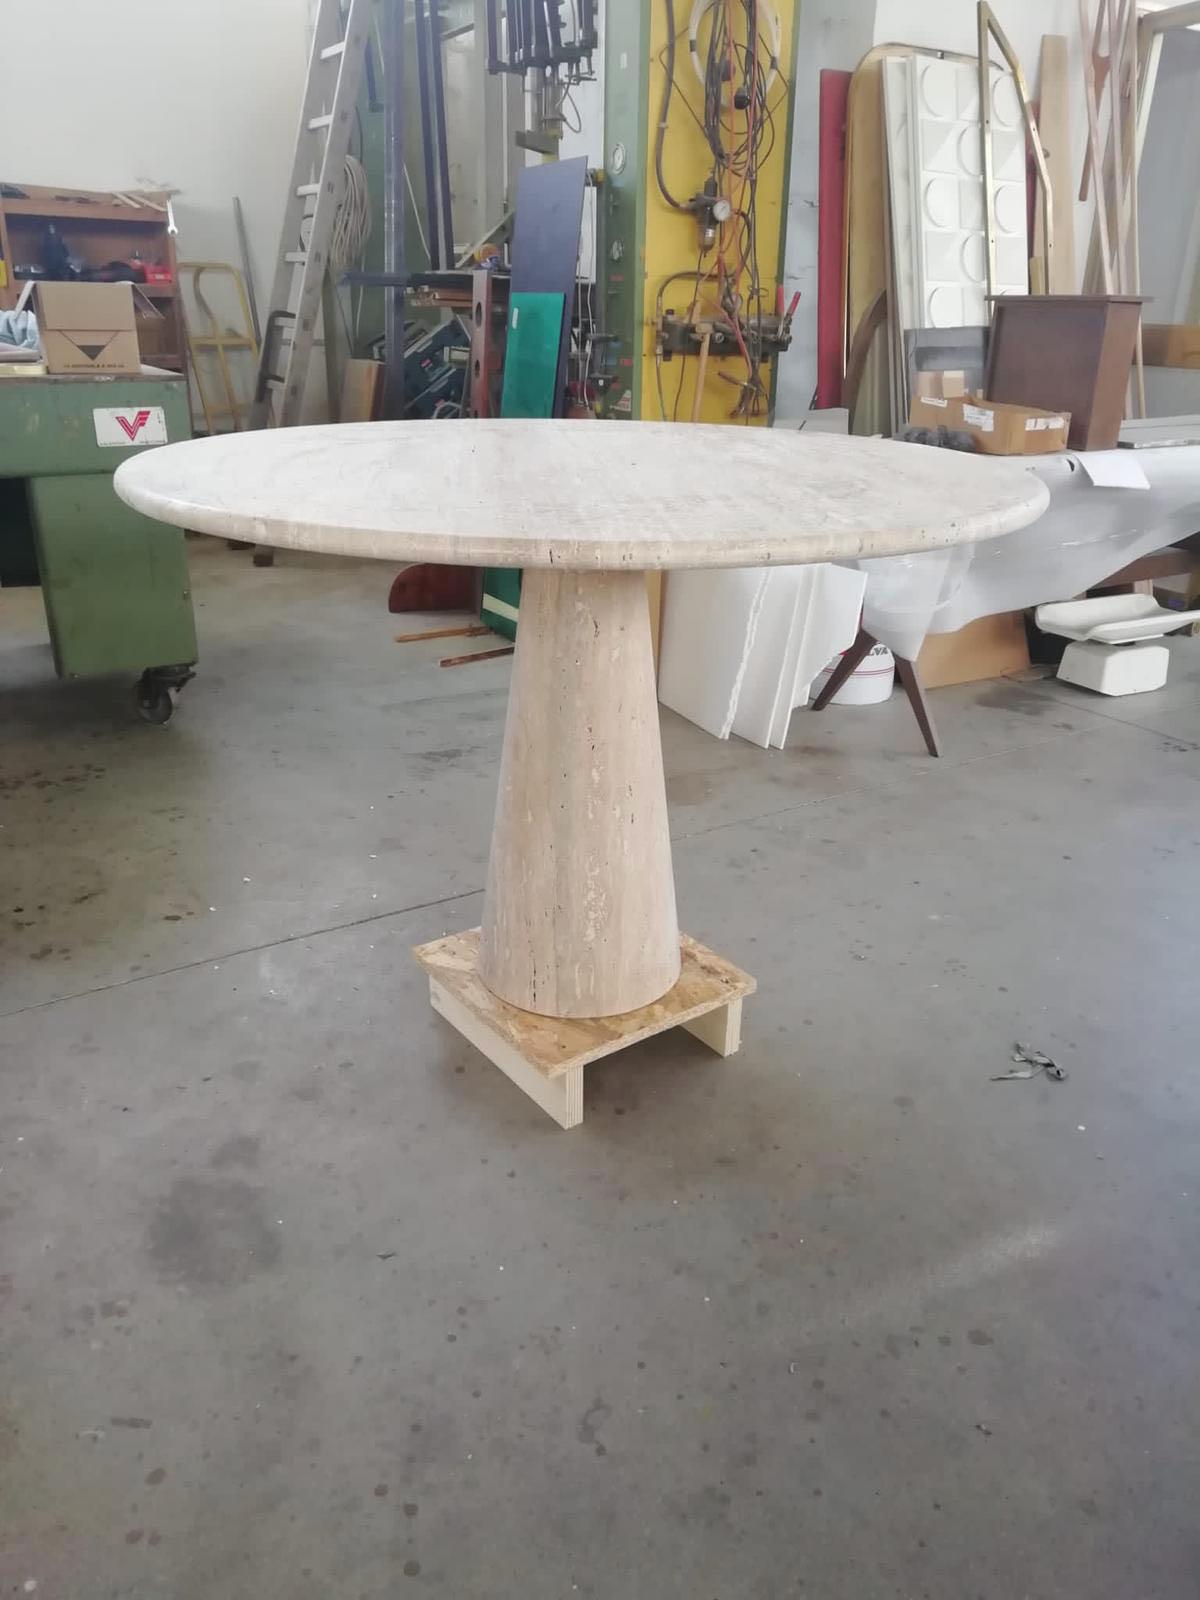 50% balance payment listing for a travertine dining table

50% deposit and shipping paid on listing 42293102

Made to order in Italy

Round top

Customised dimensions 

Honed 

Travertine pedestal



